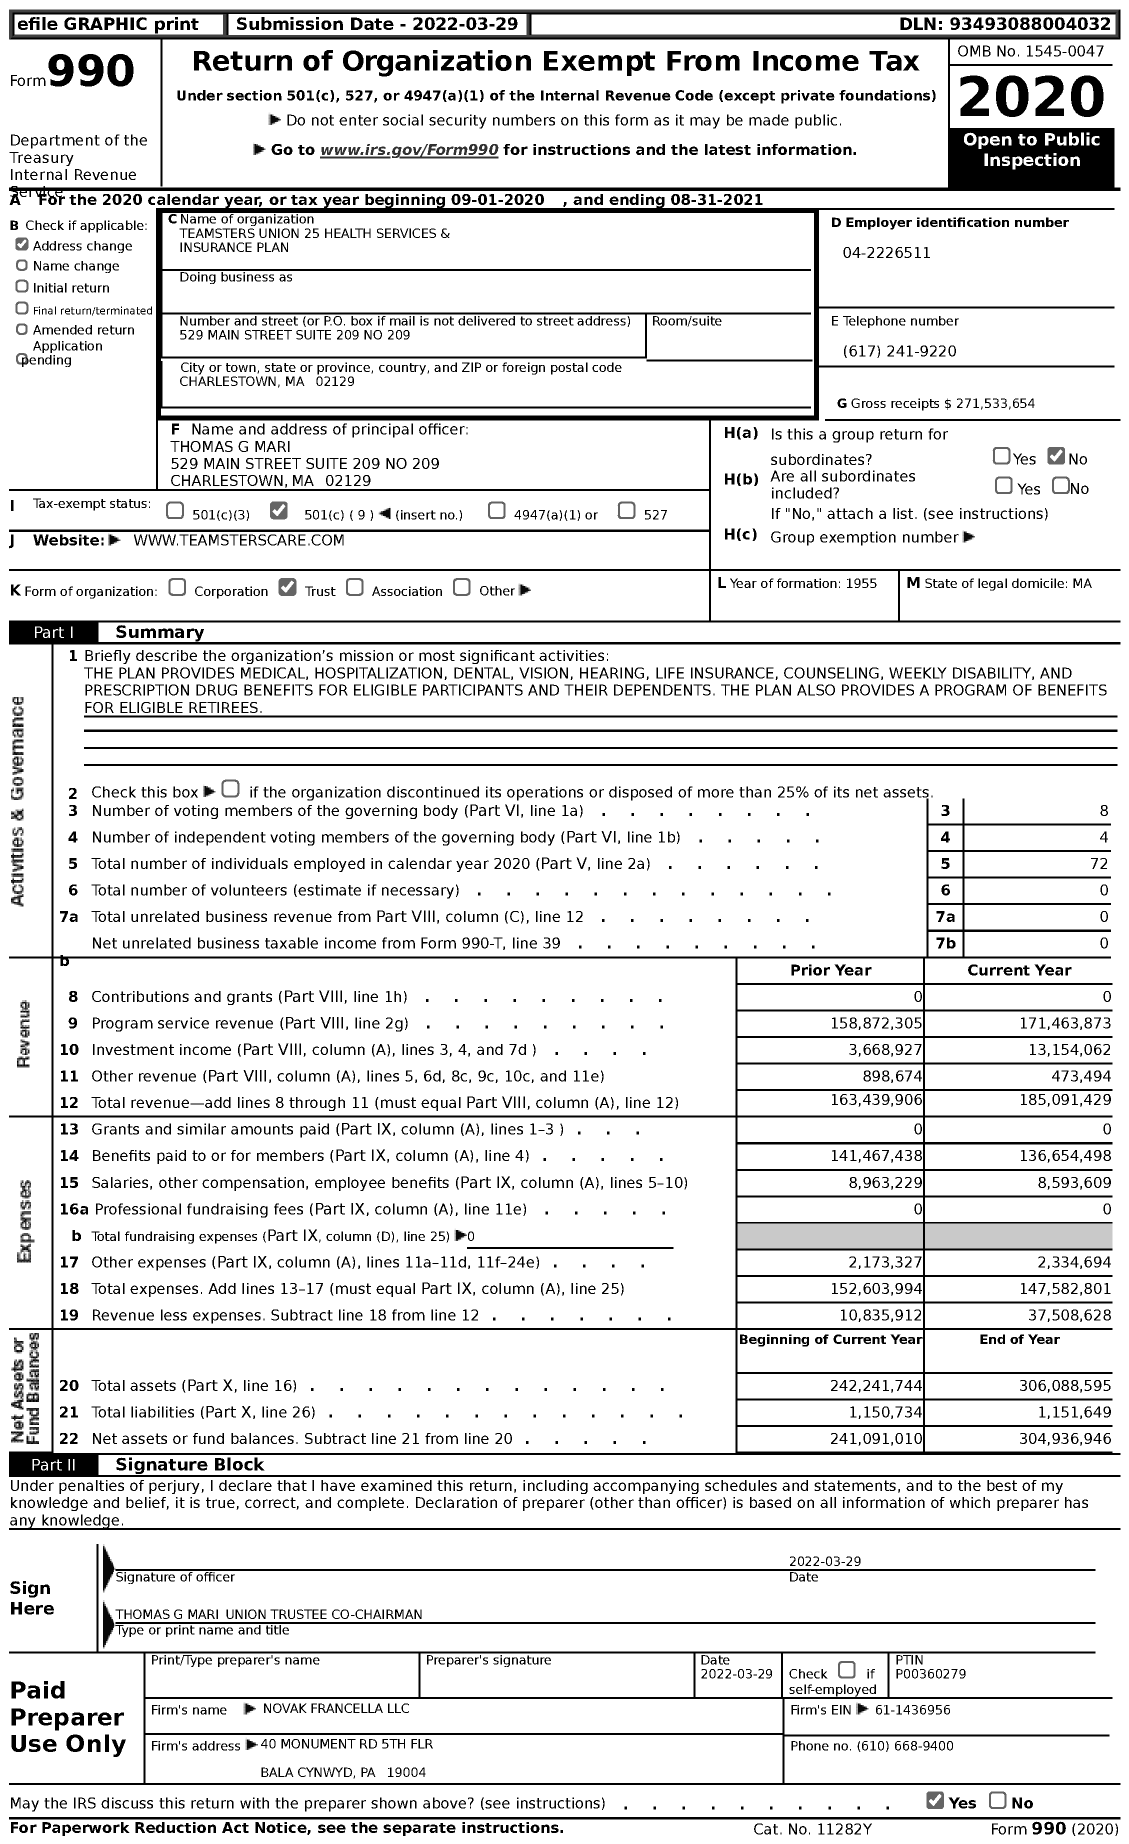 Image of first page of 2020 Form 990 for Teamsters Union Local 25 Health Services and Insurance Plan